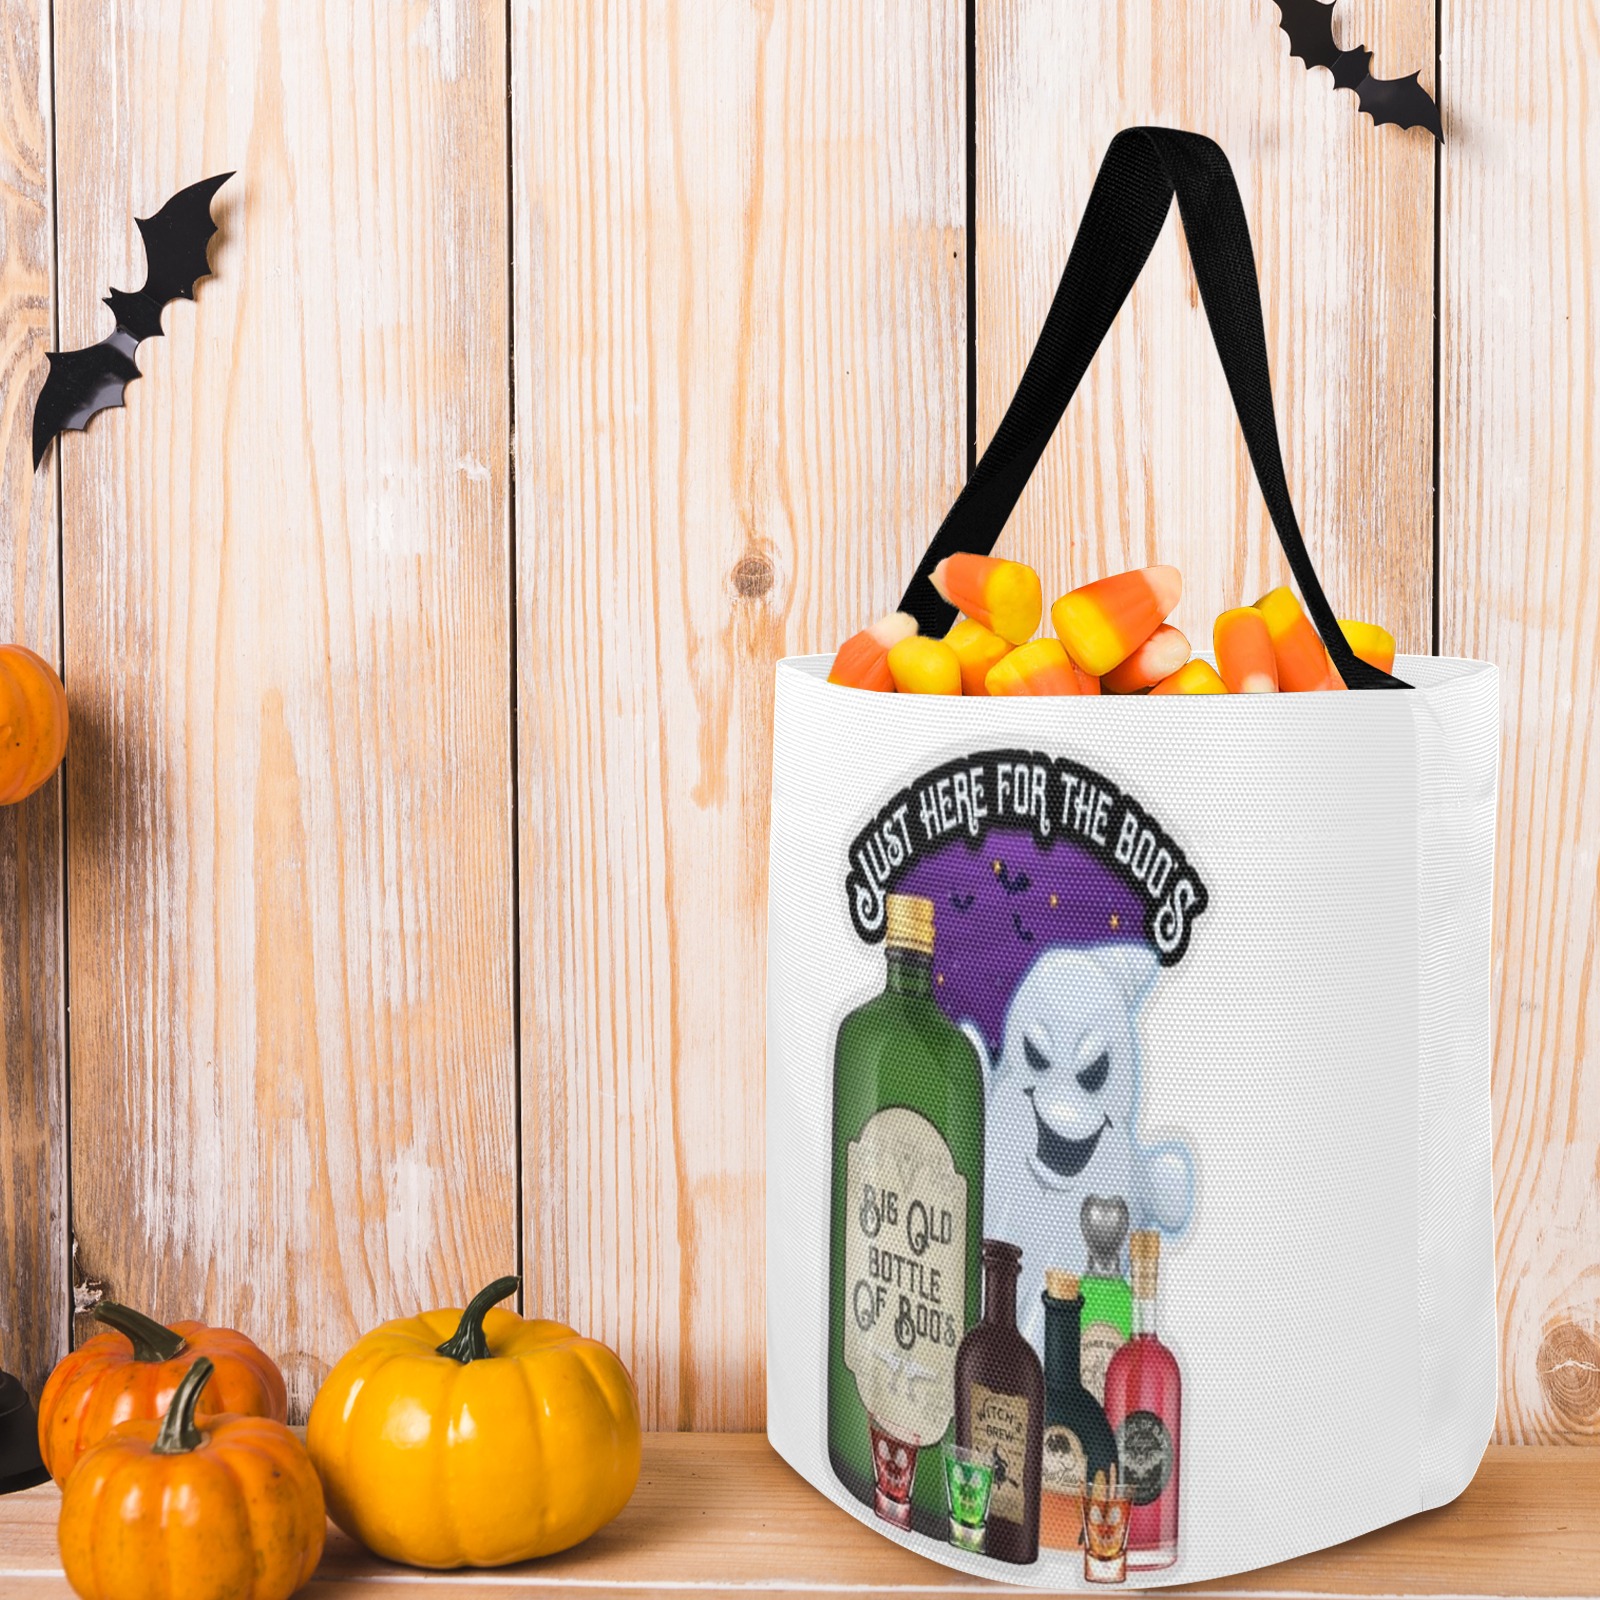 JUST HERE FOR THE BOOS TRICK OR TREAT BAG Halloween Candy Bag